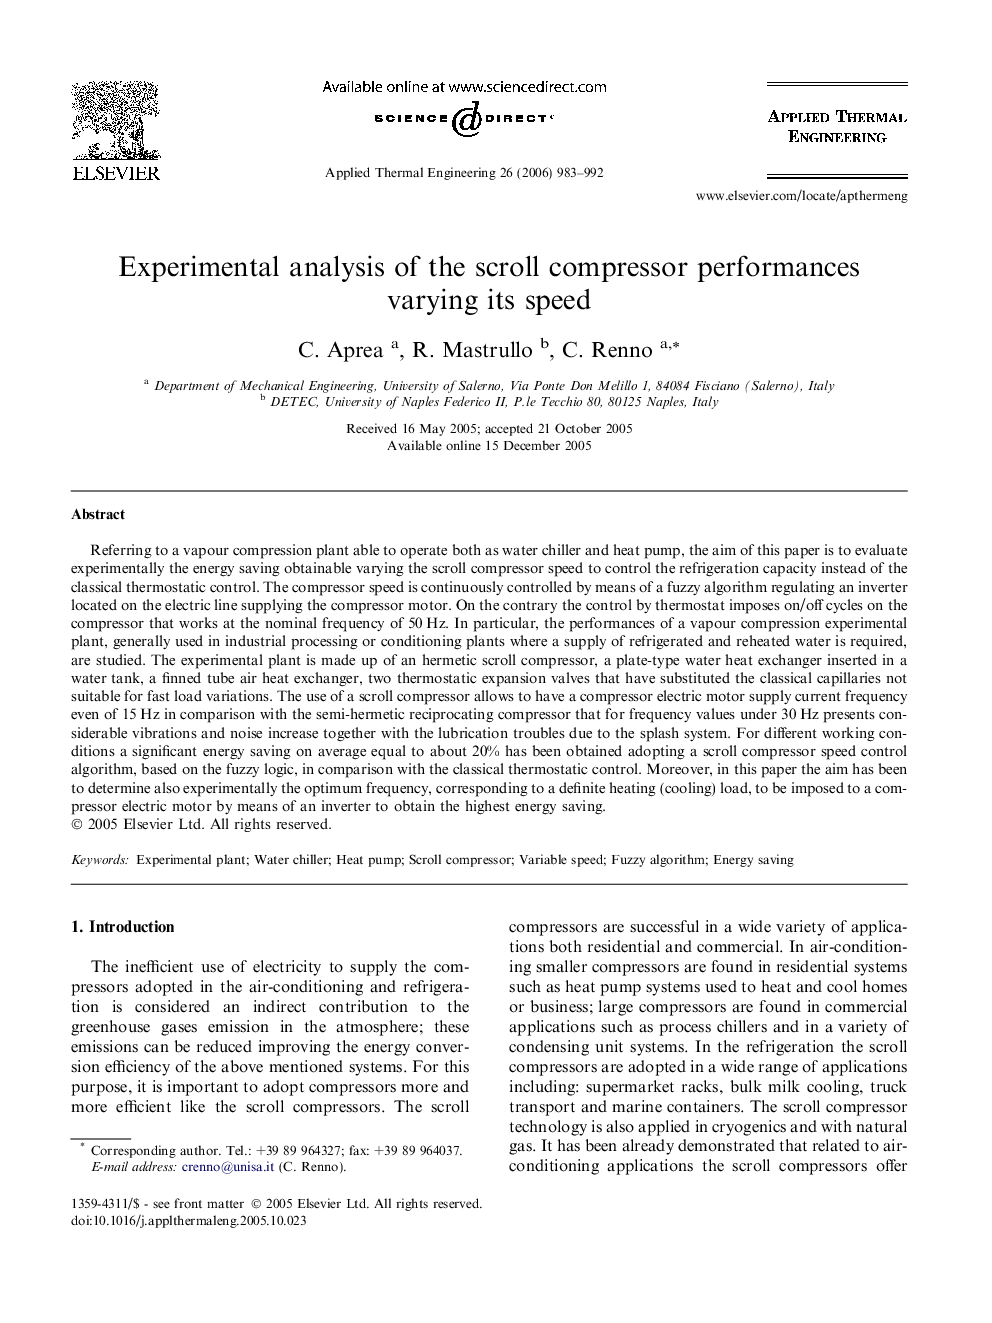 Experimental analysis of the scroll compressor performances varying its speed